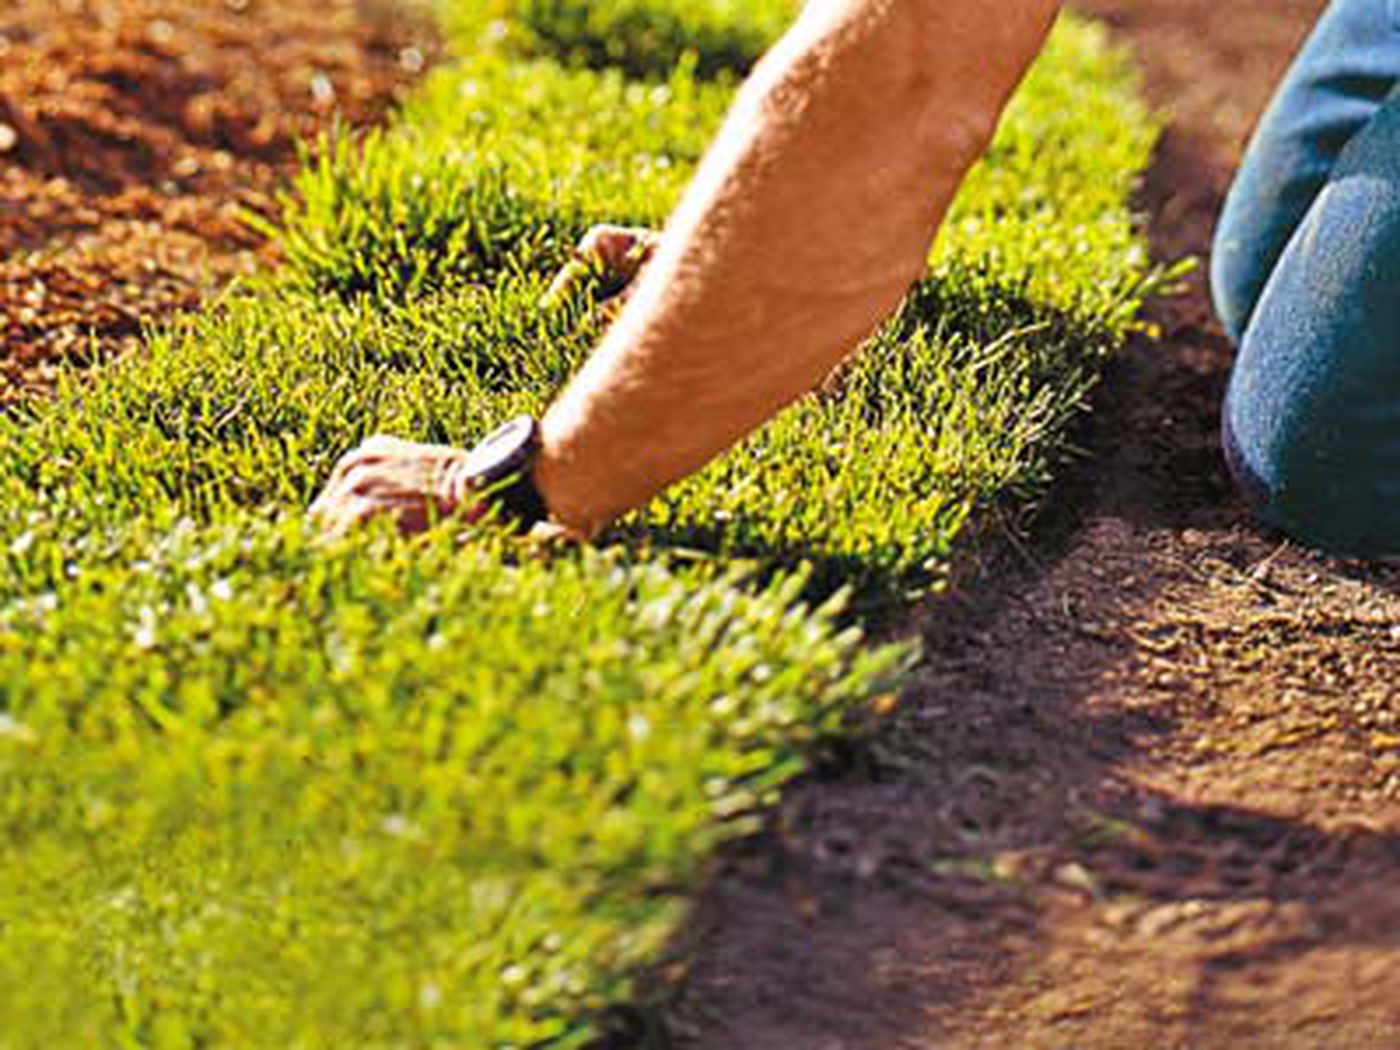 Maintaining A Green, Lush Lawn With These 10 Tips